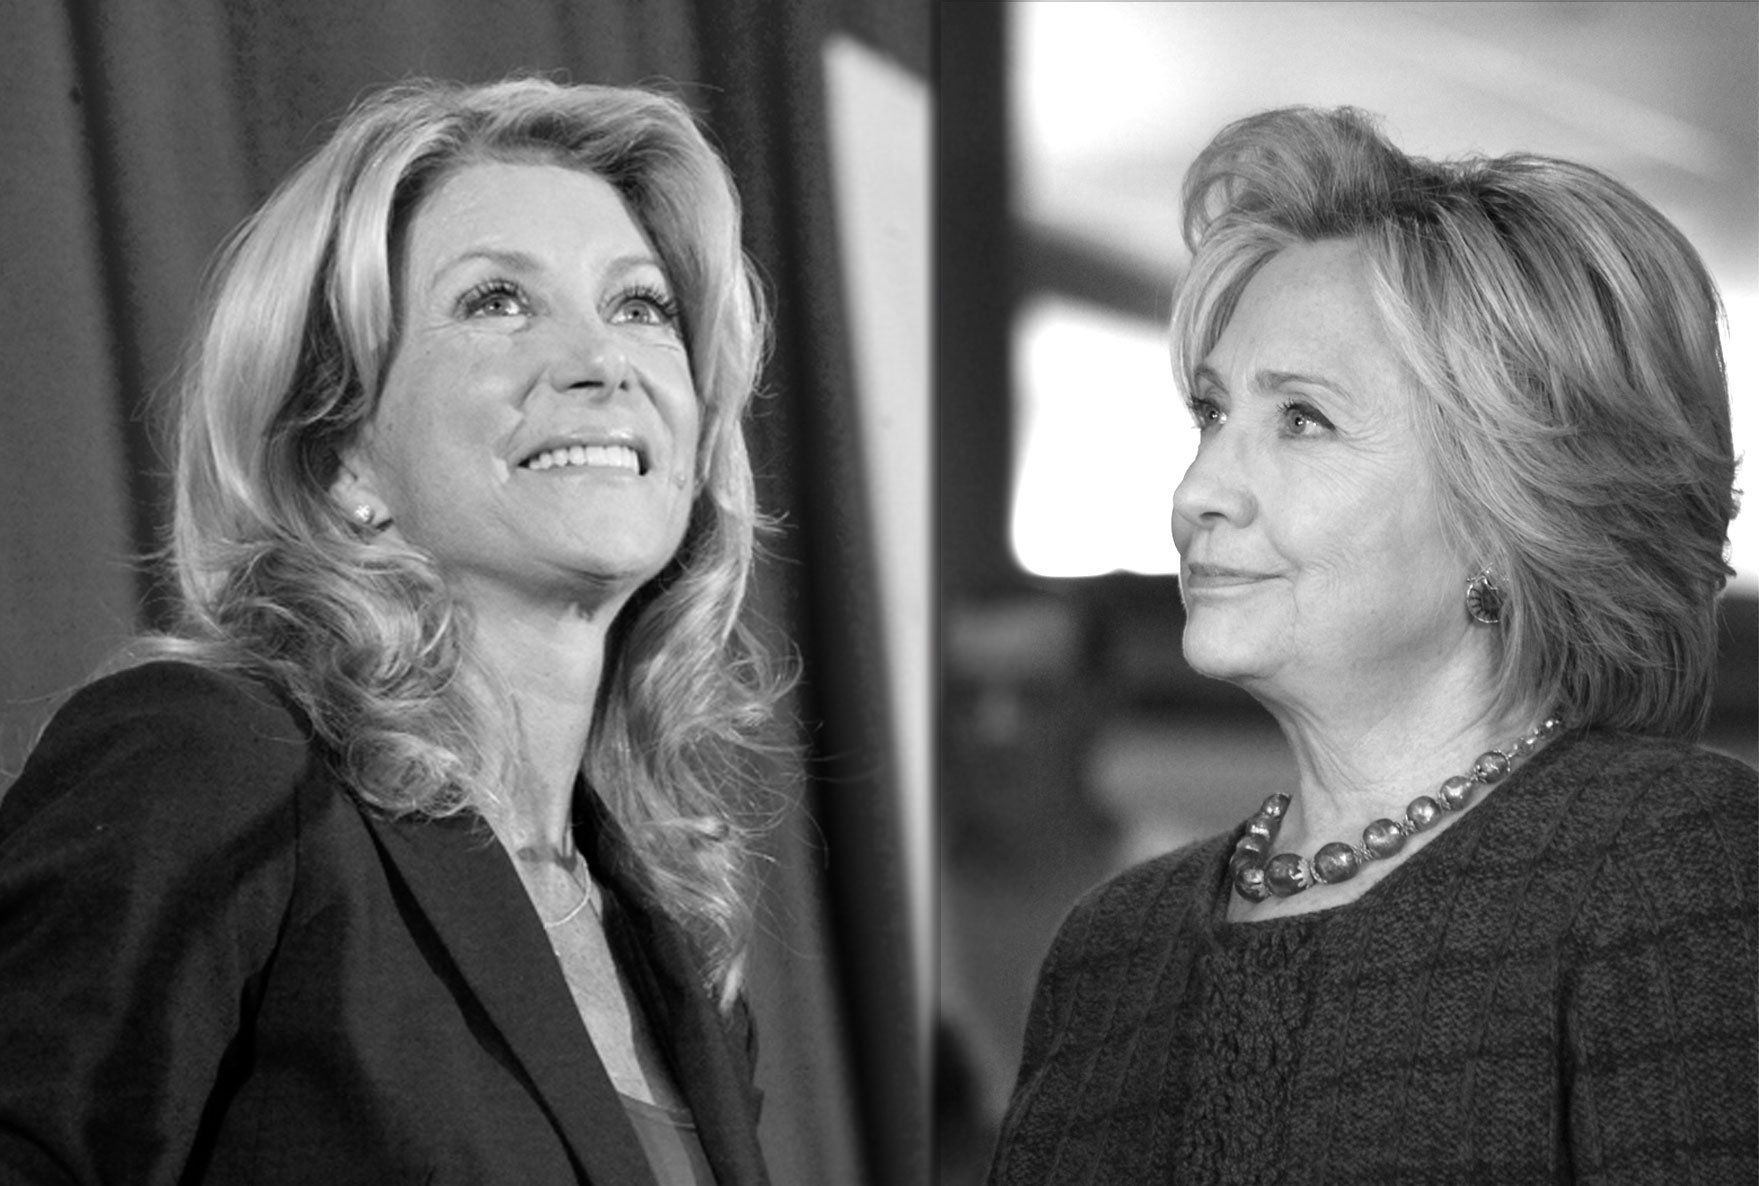 Wendy Davis at her gubernatorial campaign announcement in 2013; Hillary Clinton at an Iowa presidential campaign stop in 2016.